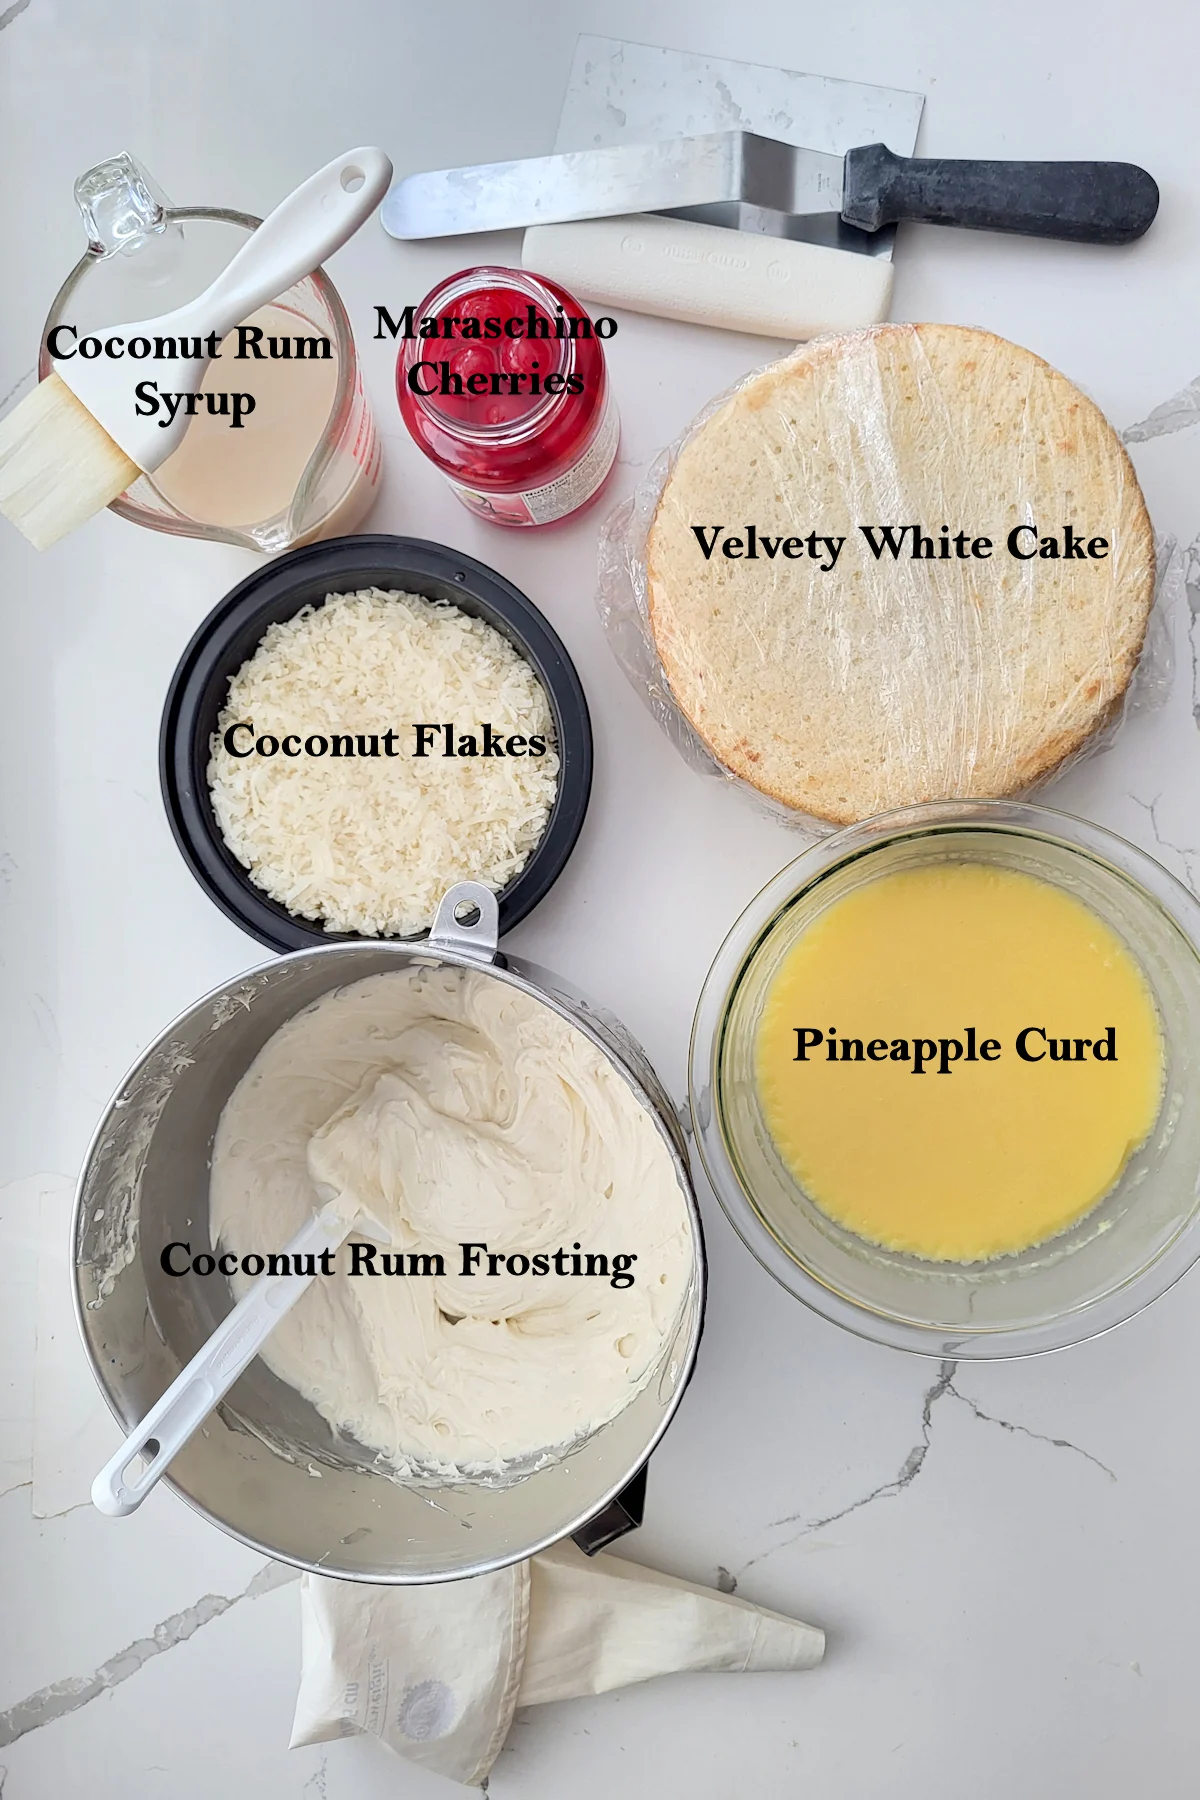 Cake layers, a bowl of coconut, a bowl of pineapple curd, a bowl of frosting, a jar of cherries, a piping bag, spatula, pastry brush and a scraper.